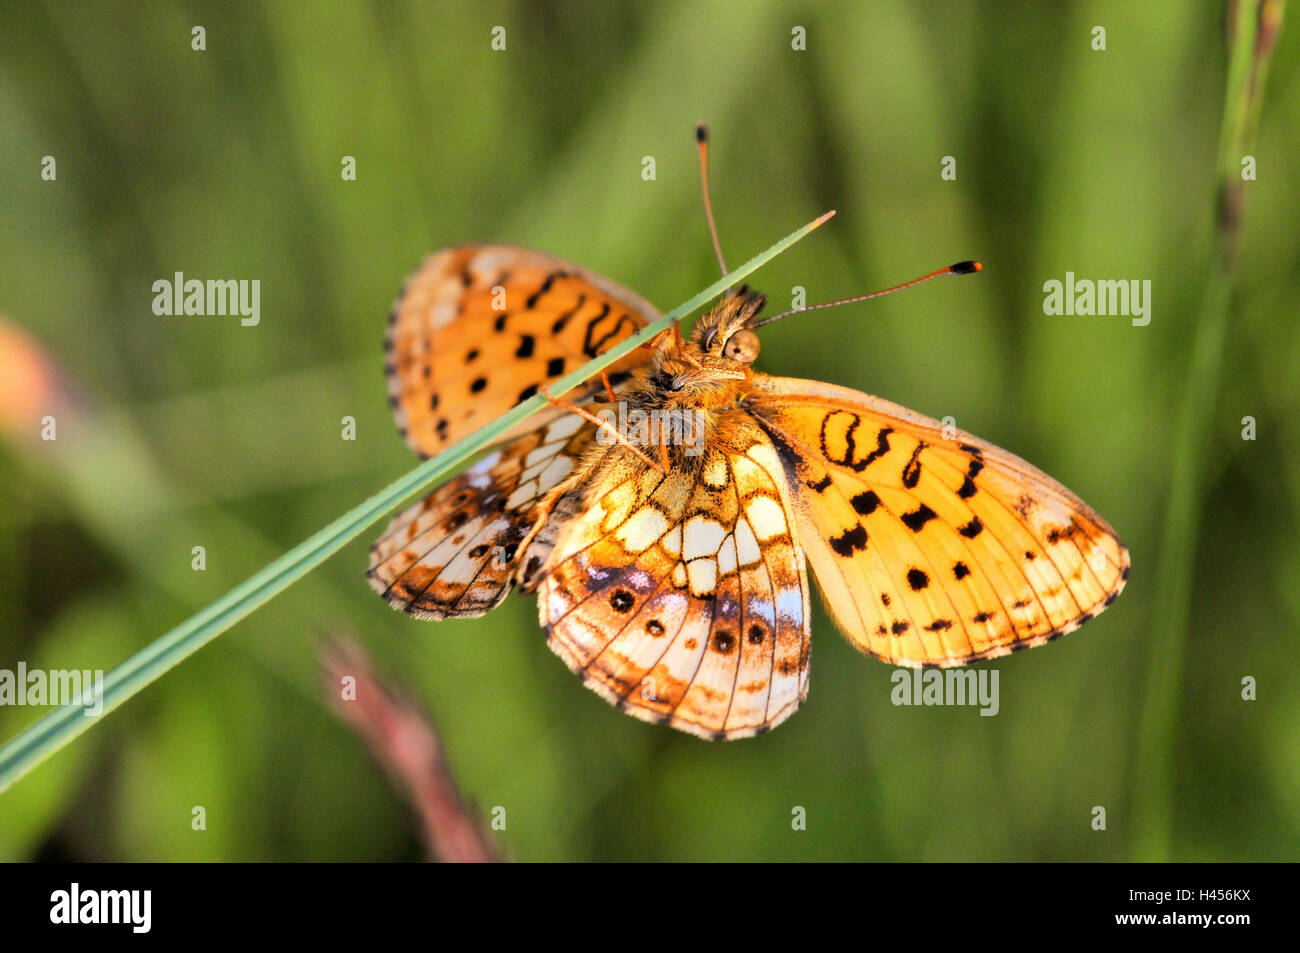 Lesser marbled fritillary, blade of grass, Stock Photo